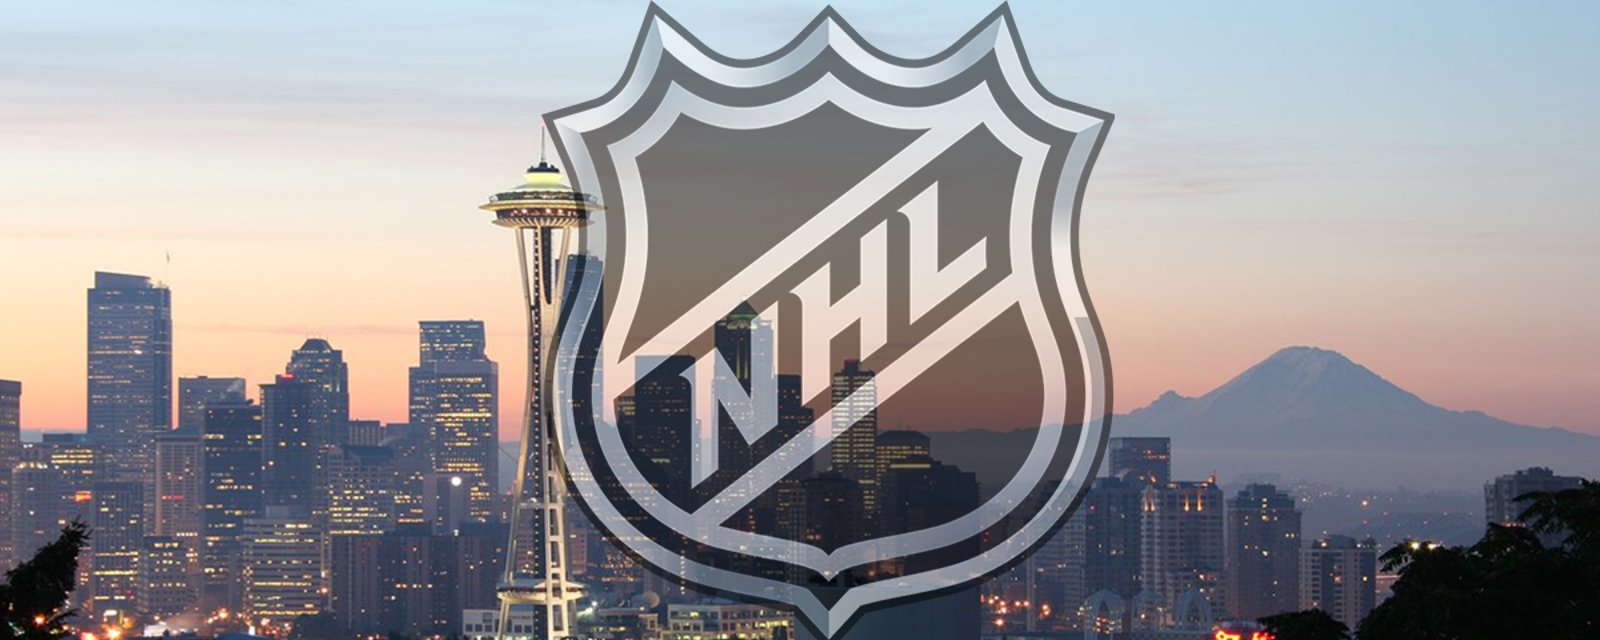 Controversial former NHL GM confirms he’s had discussions with Seattle expansion group